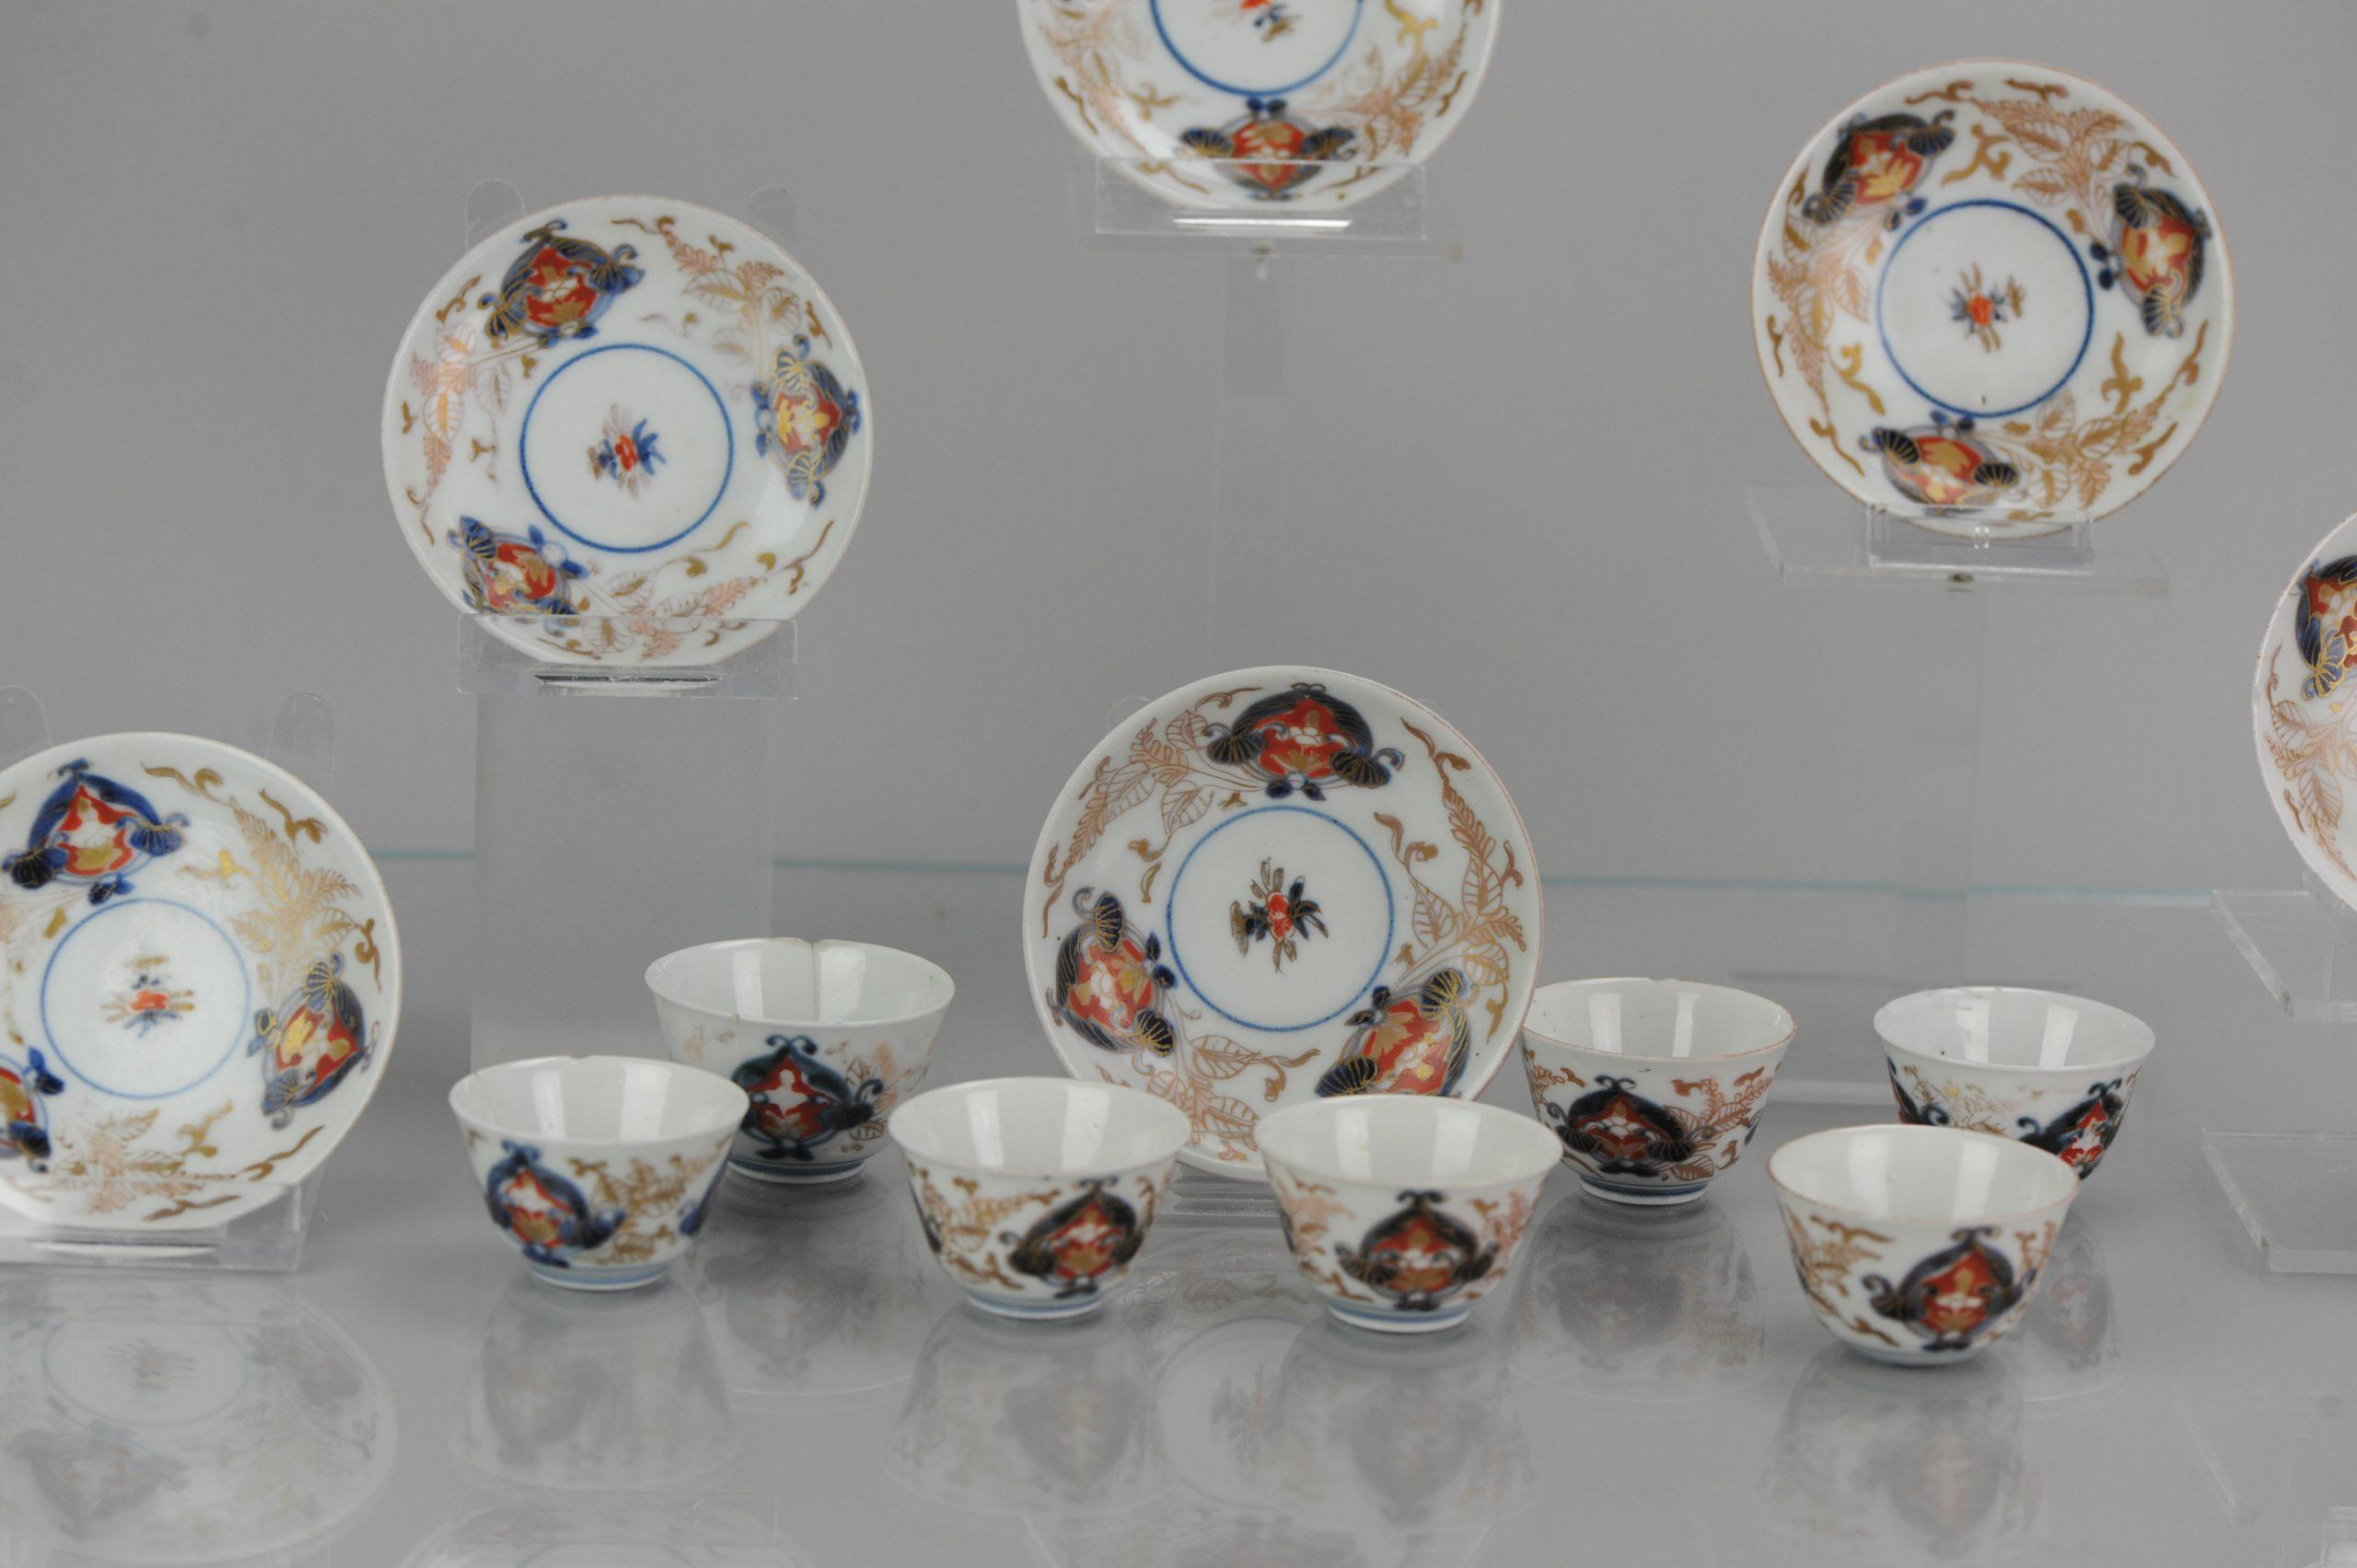 Japanese Porcelain Set of Tea Cup Bowl and Saucer Beaker Saucer Imari Edo Period In Good Condition For Sale In Amsterdam, Noord Holland